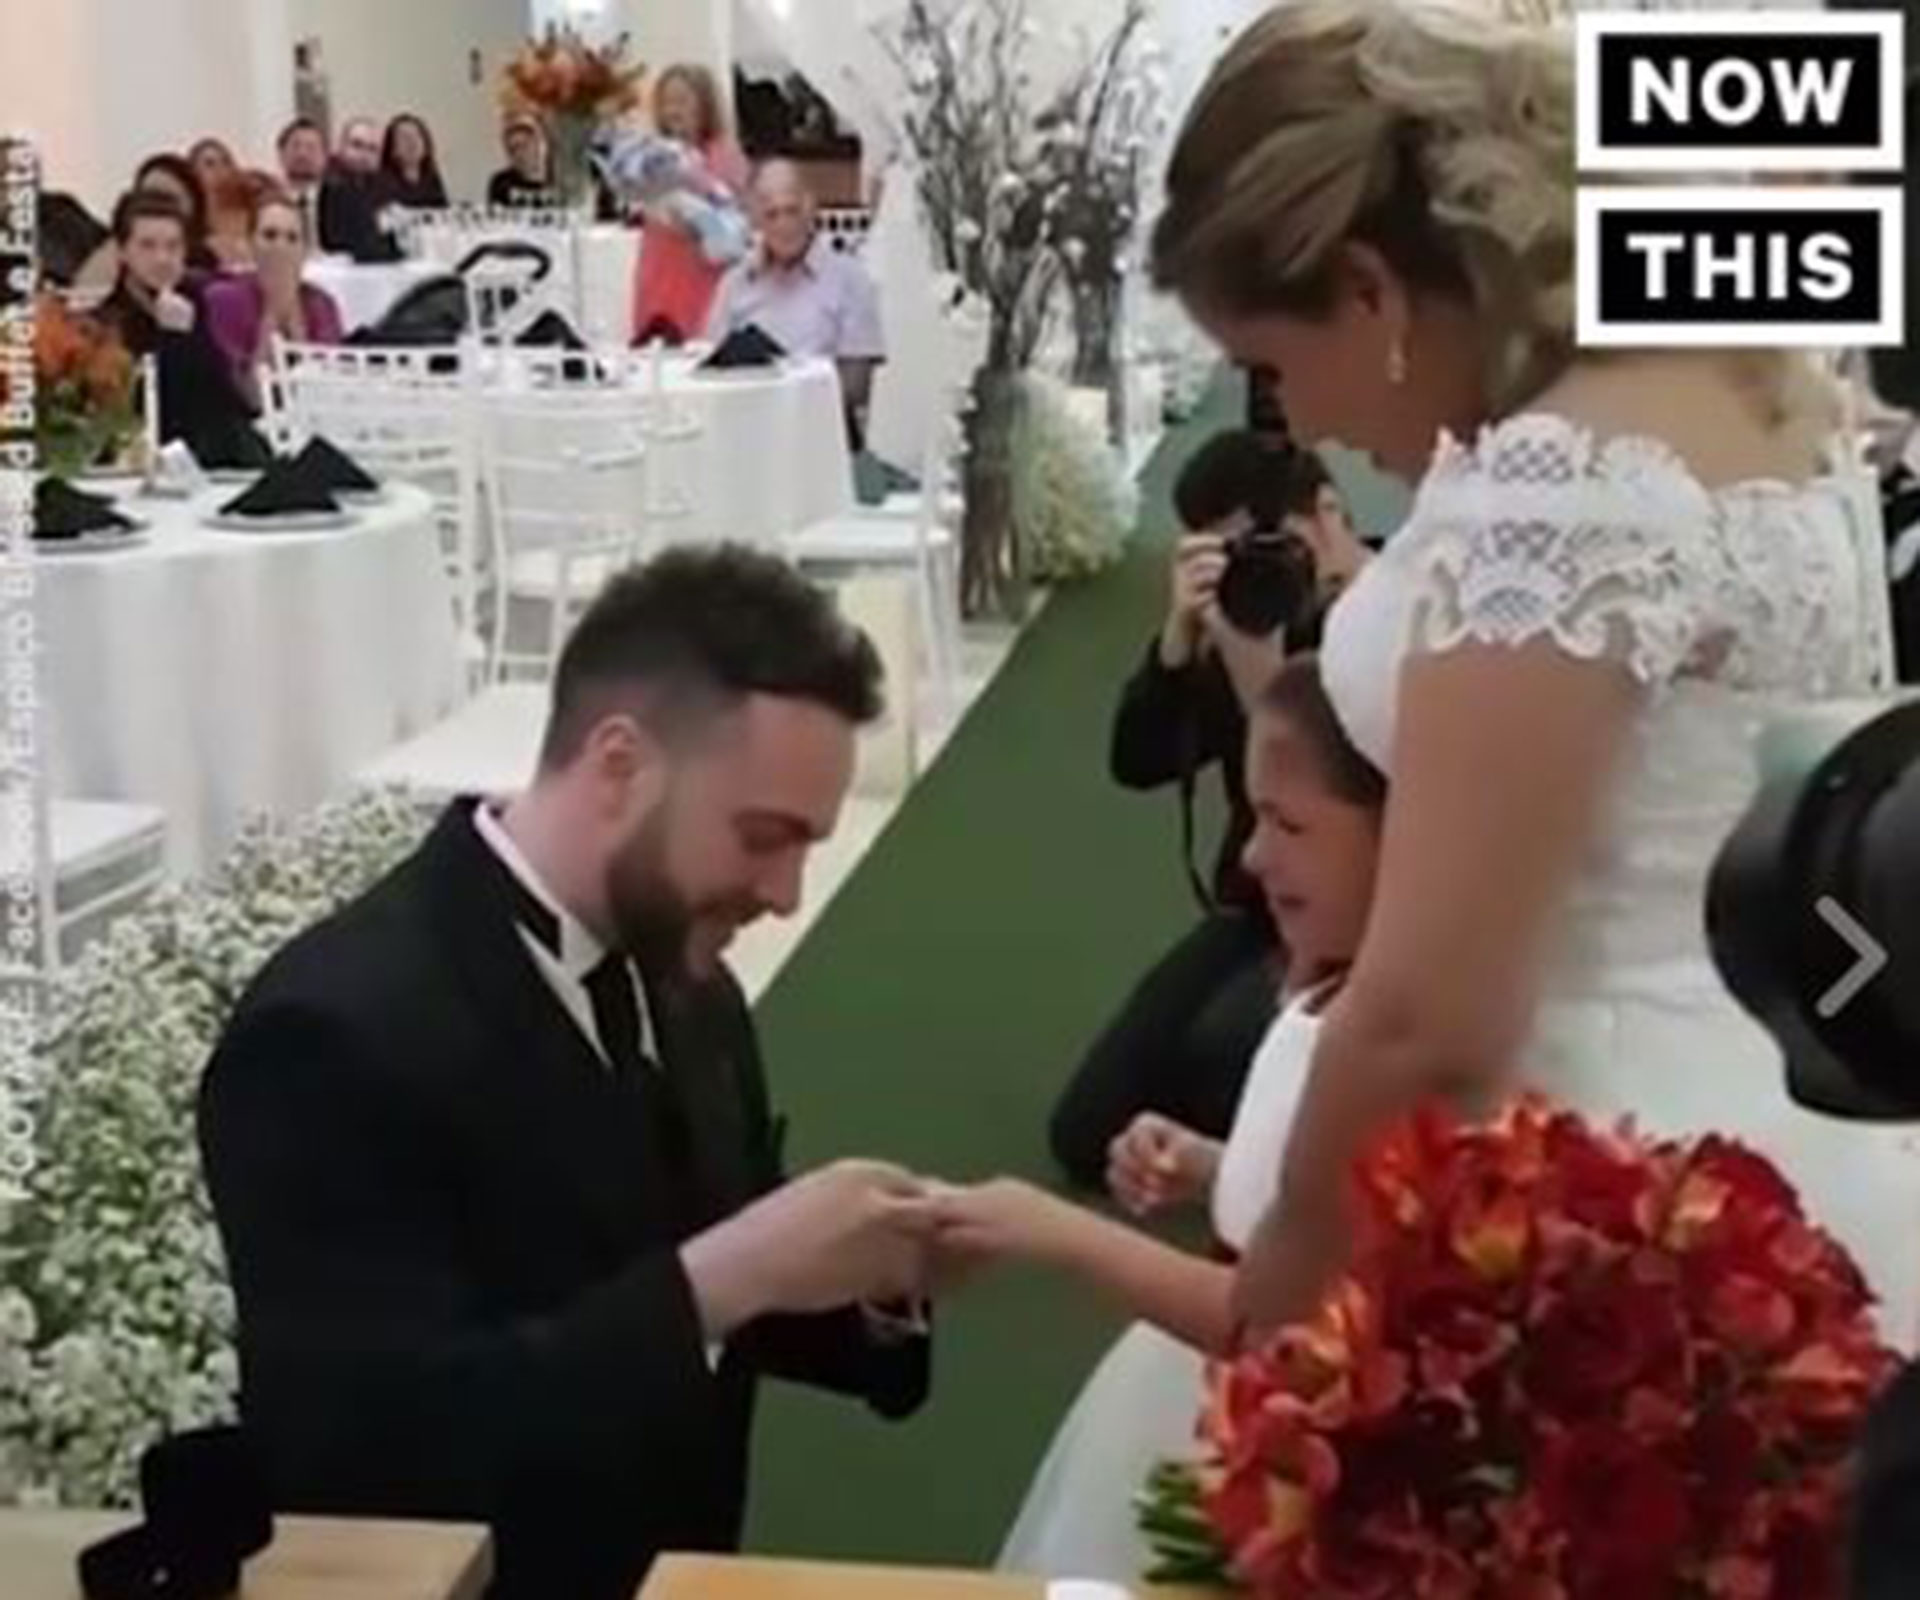 Heartwarming: Groom asks stepdaughter to be his child for life